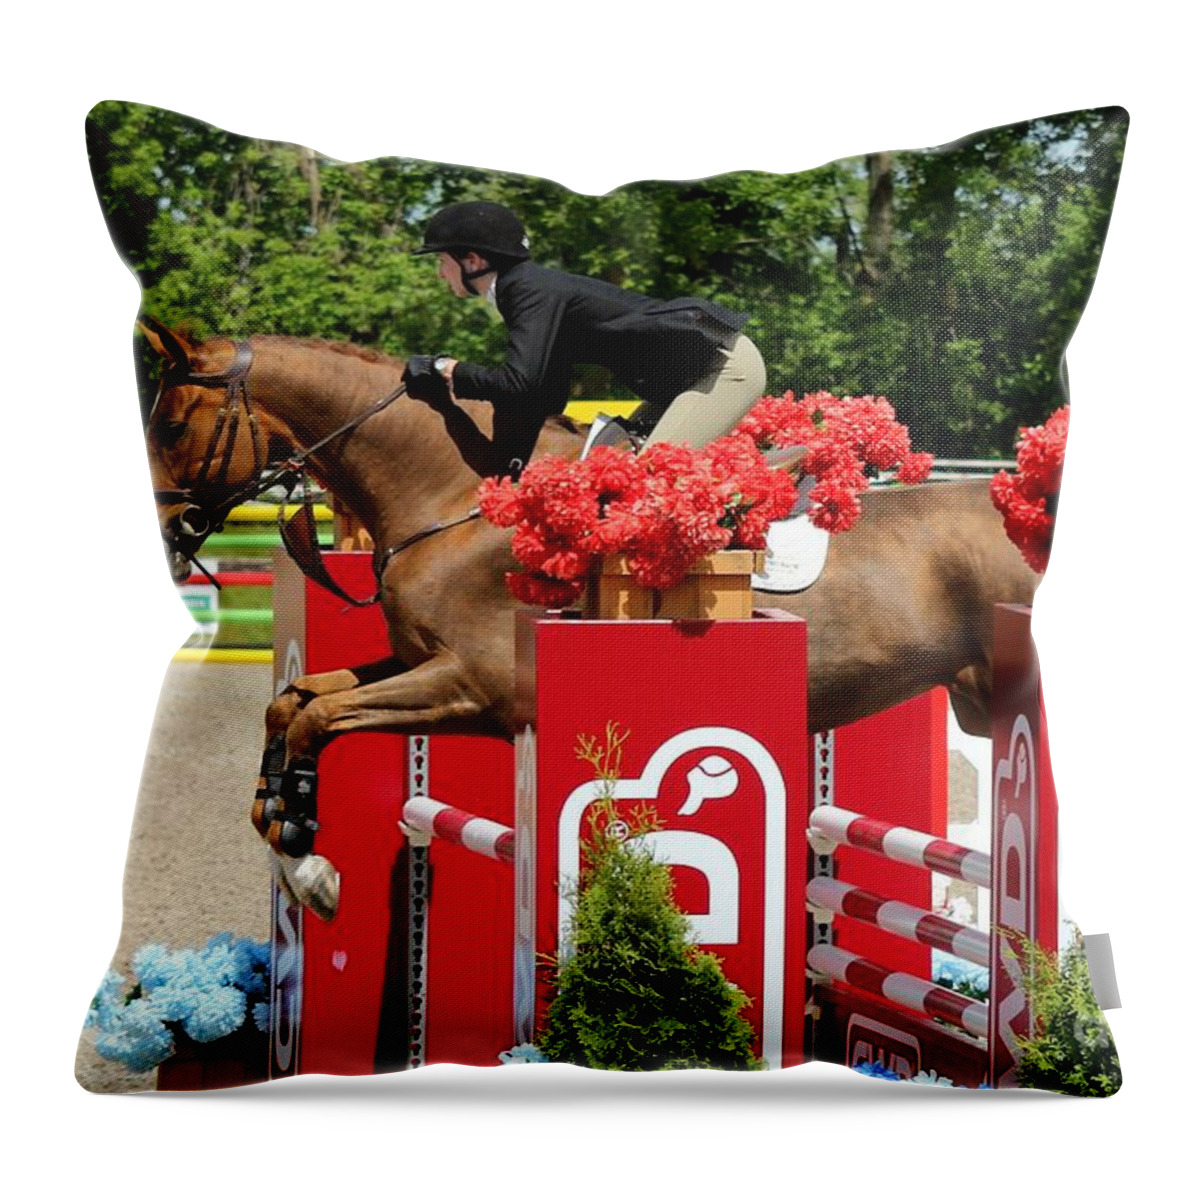 Equestrian Throw Pillow featuring the photograph Jumper45 by Janice Byer